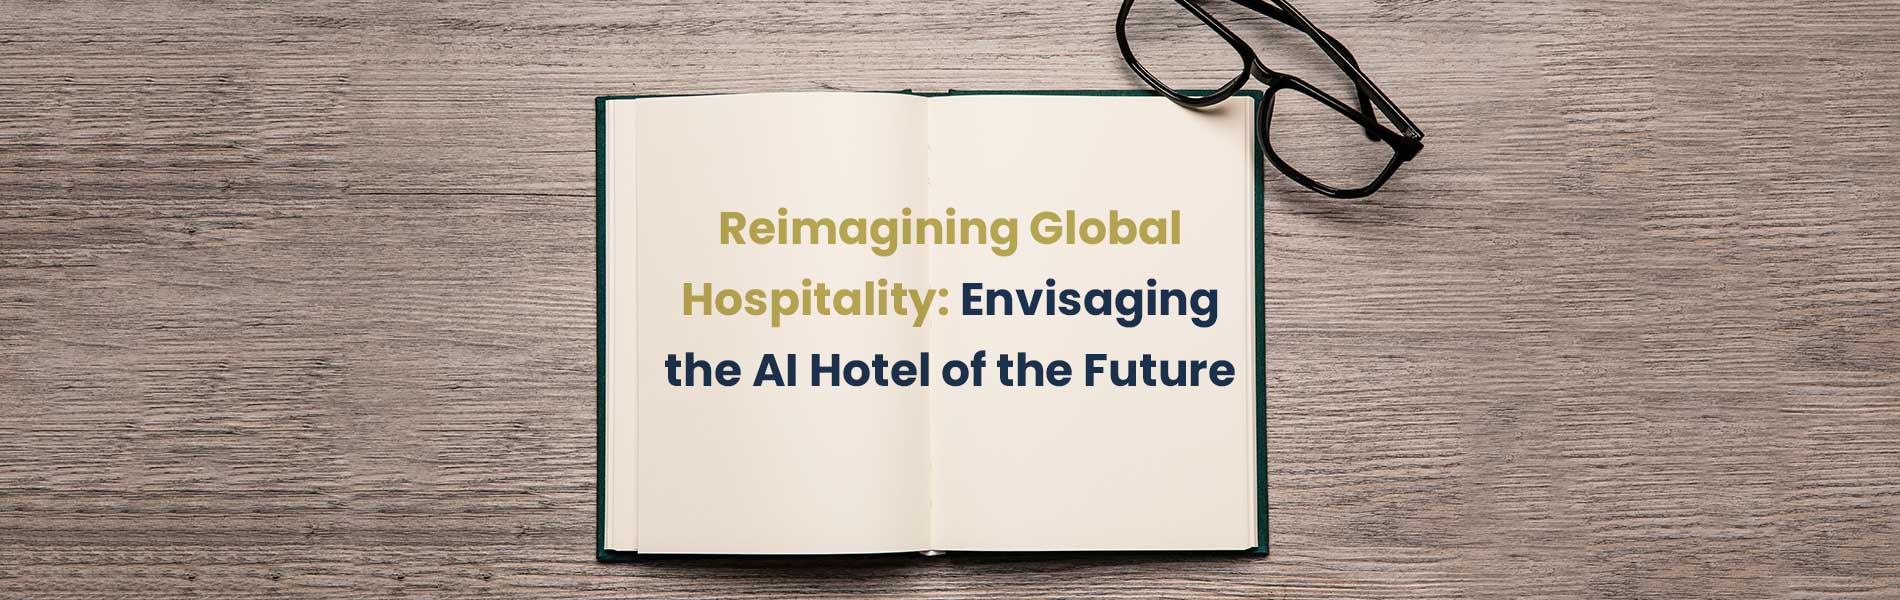 A Journey Through the Pages of “Reimagining Global Hospitality”